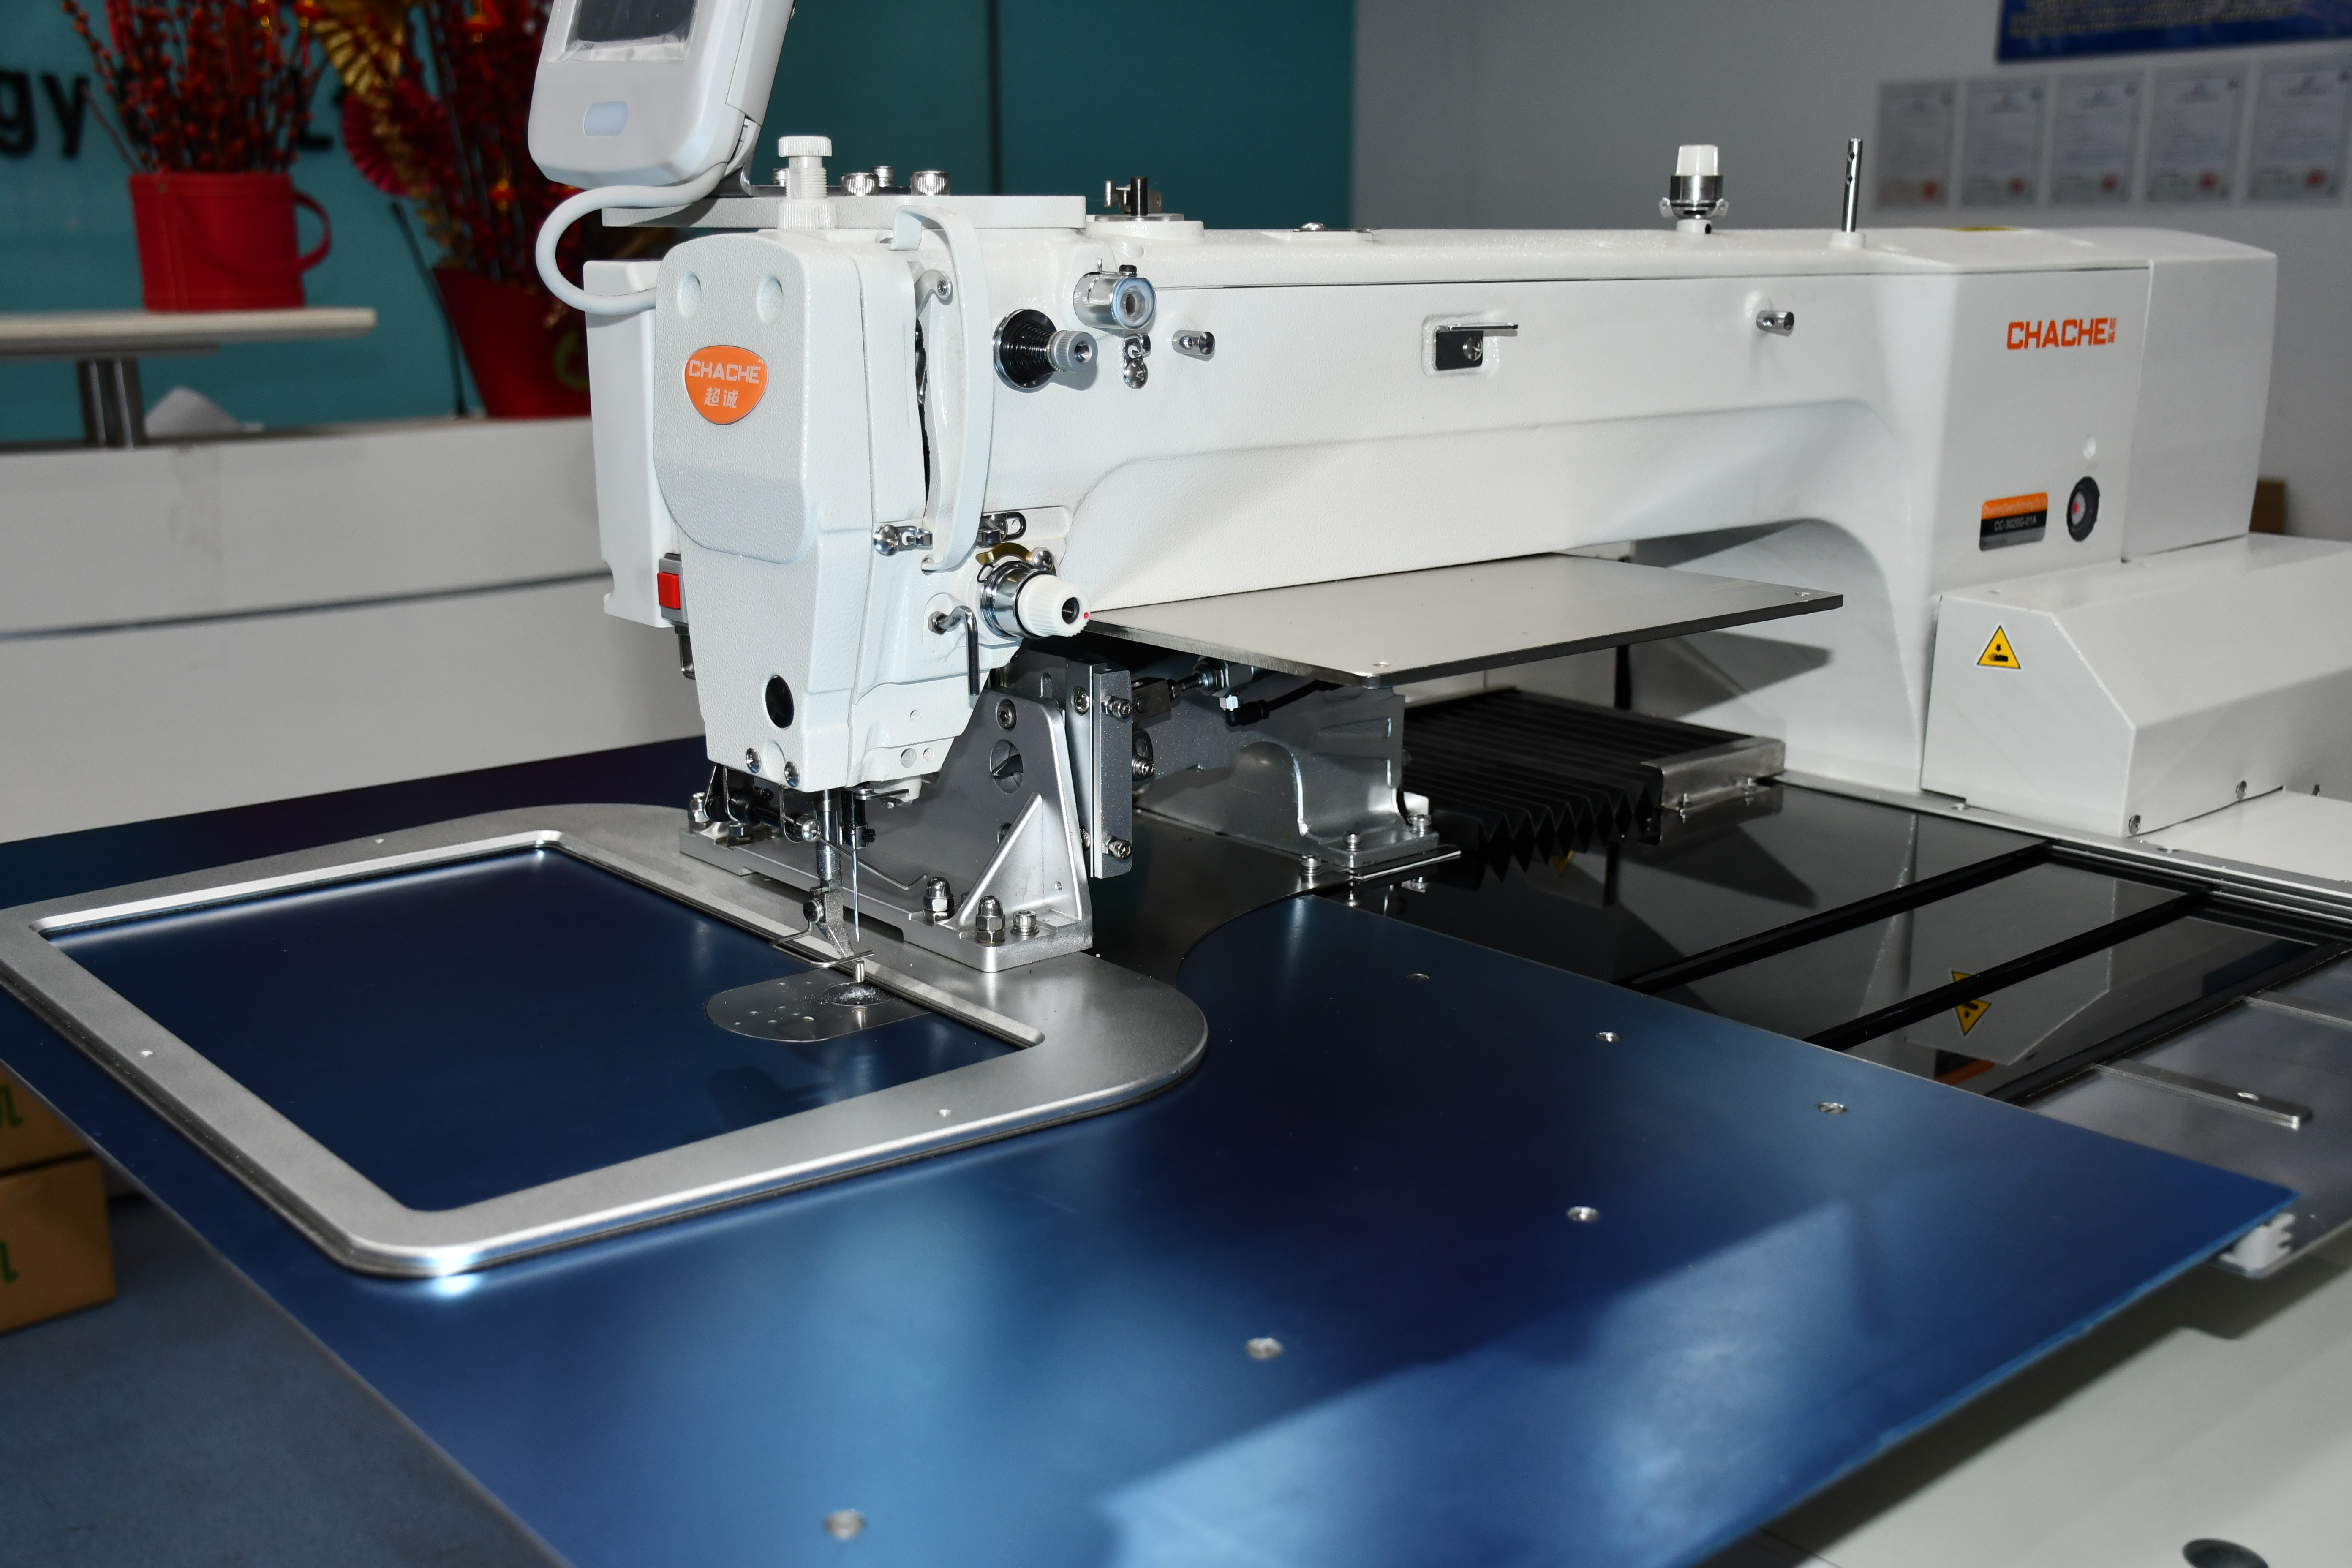 https://www.cn-chache.com/products/computerized-pattern-sewing-machine-cc-1010g-1310g-1510g-01s/